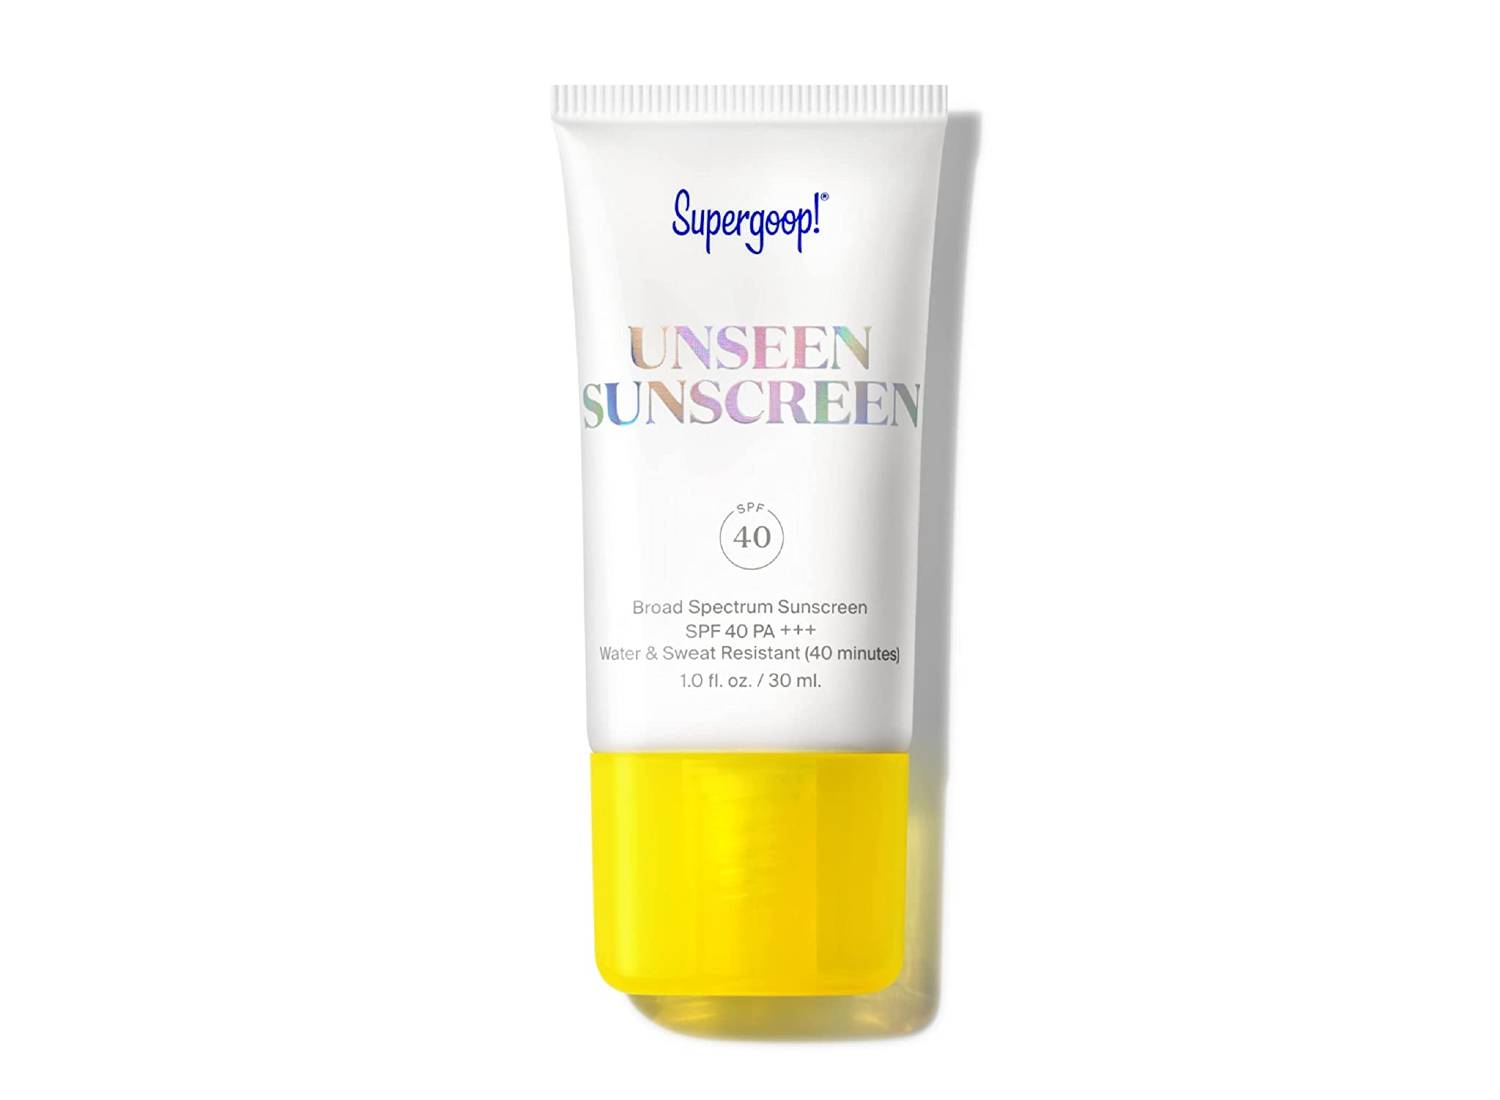 A white bottle with a yellow lid of Supergoop!'s Unseen Sunscreen